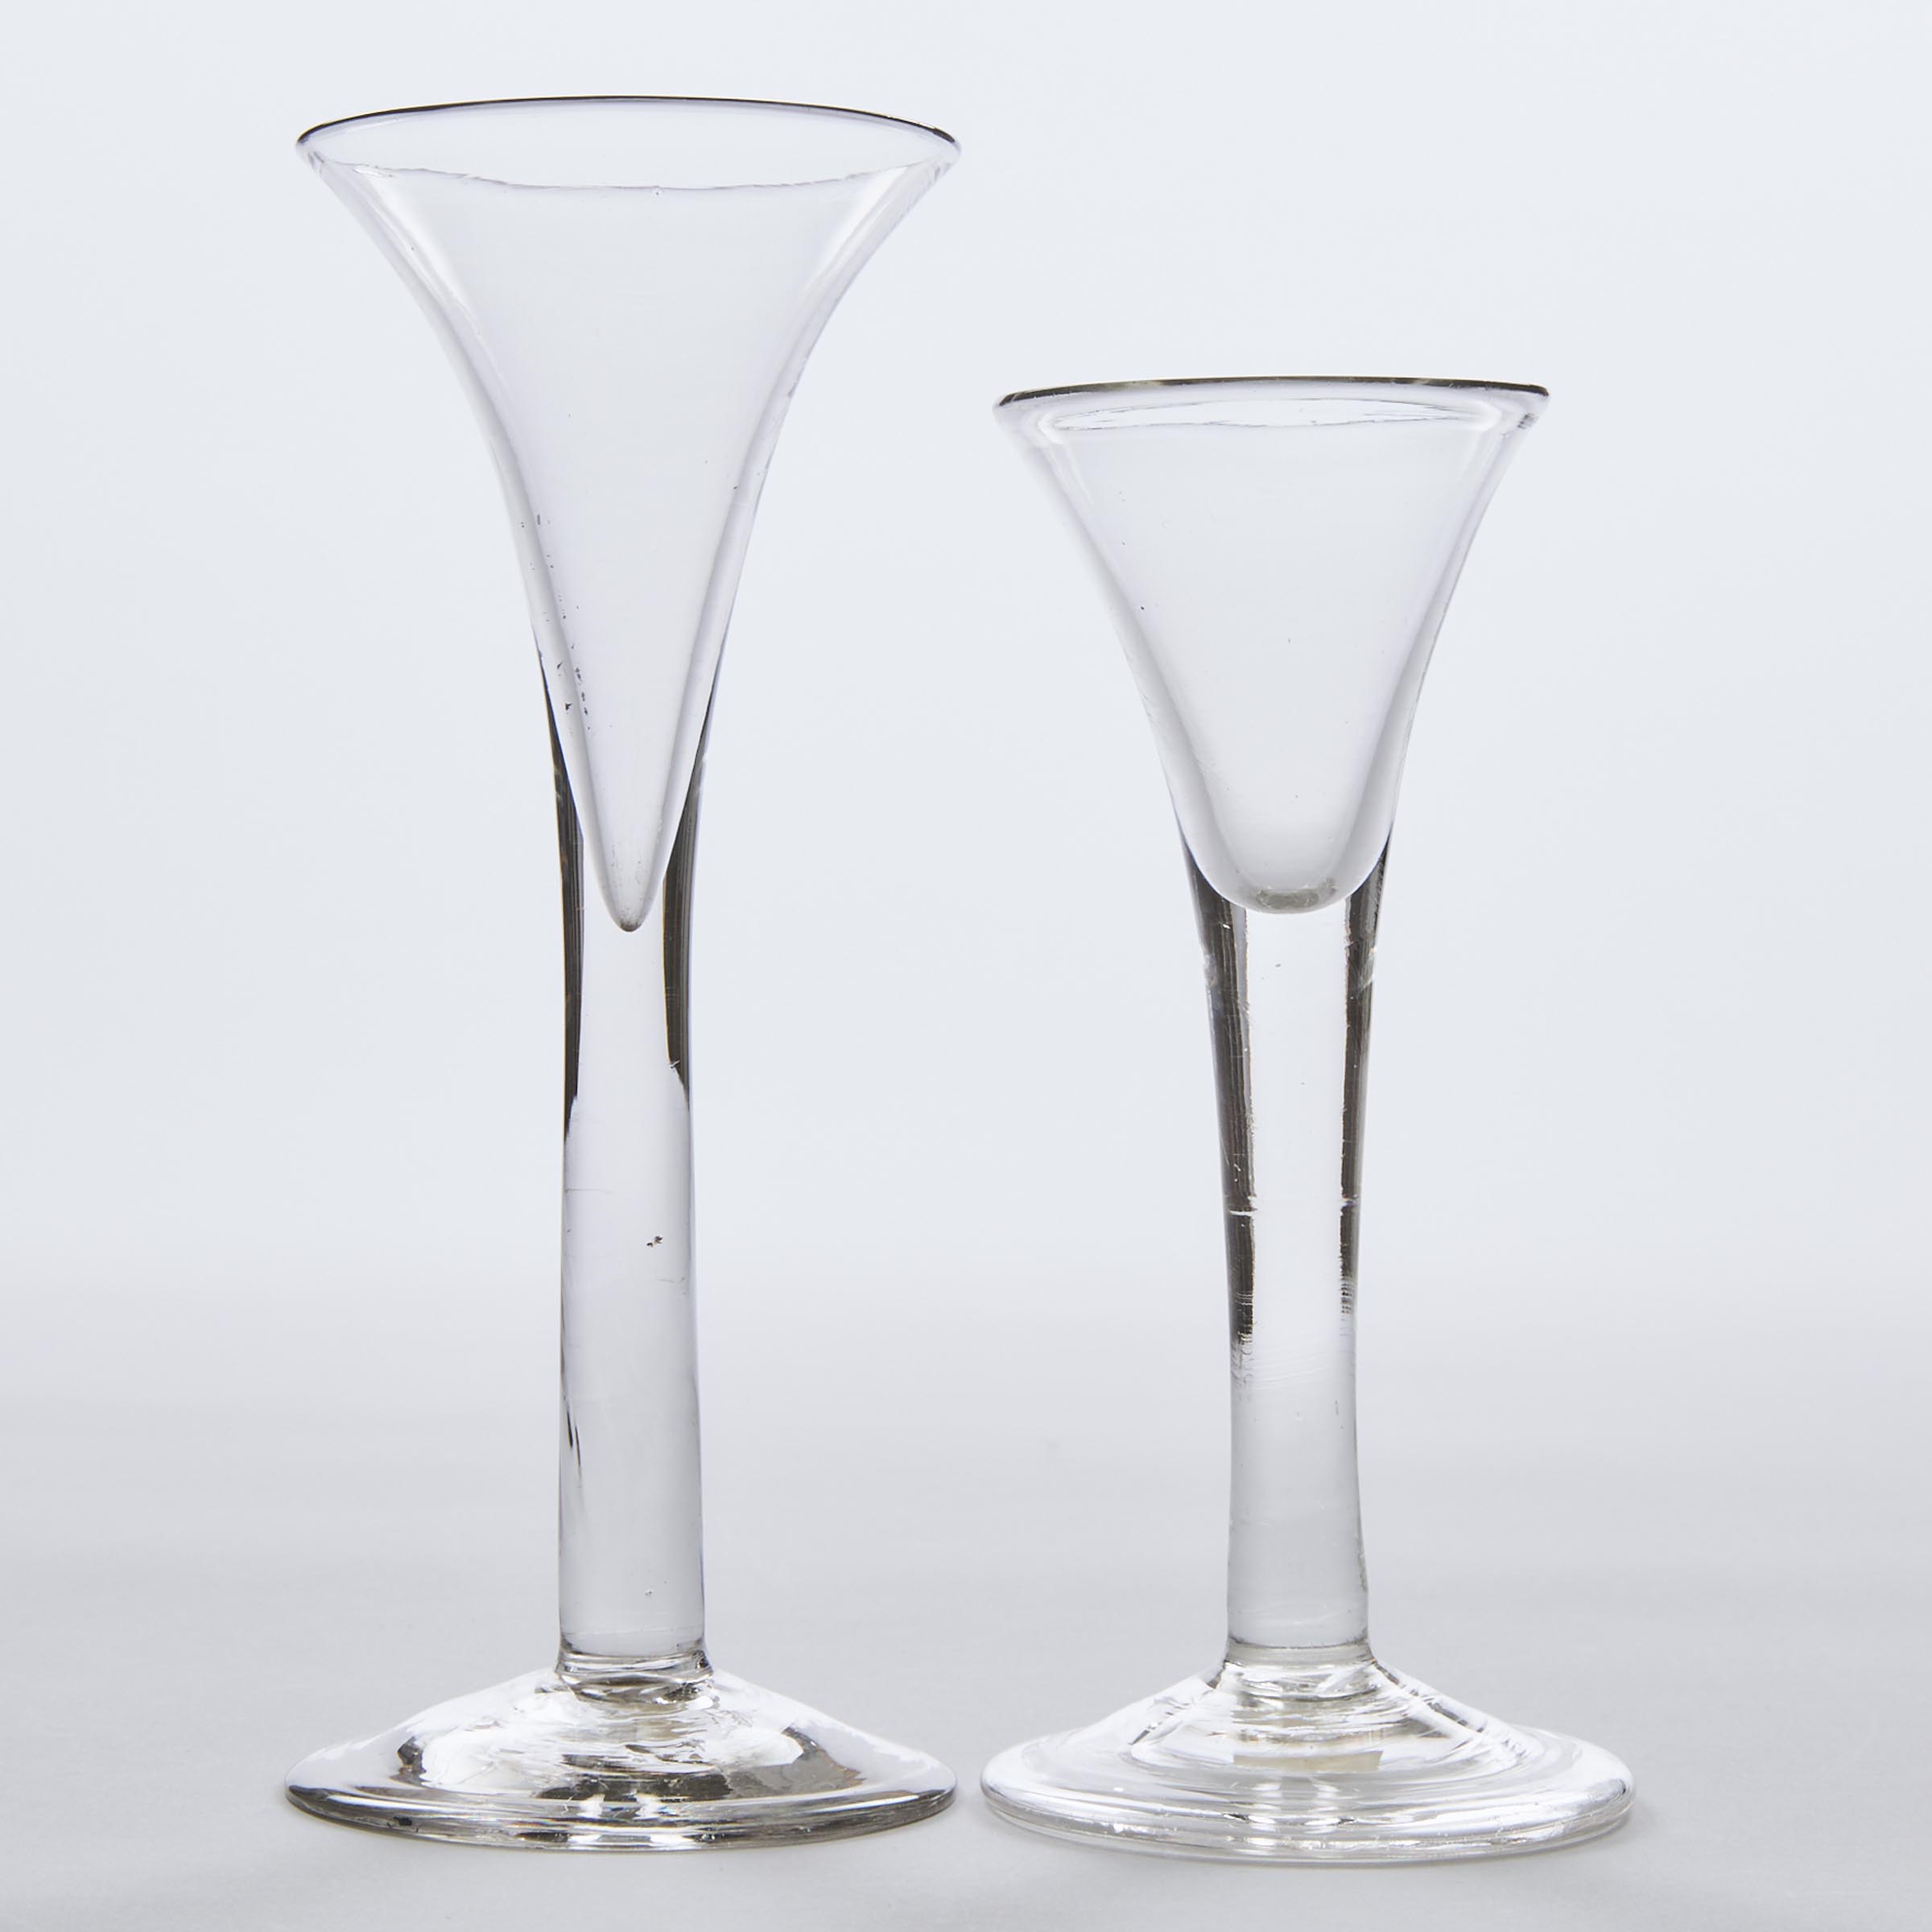 Two English Plain Stemmed Wine Glasses, mid-18th century